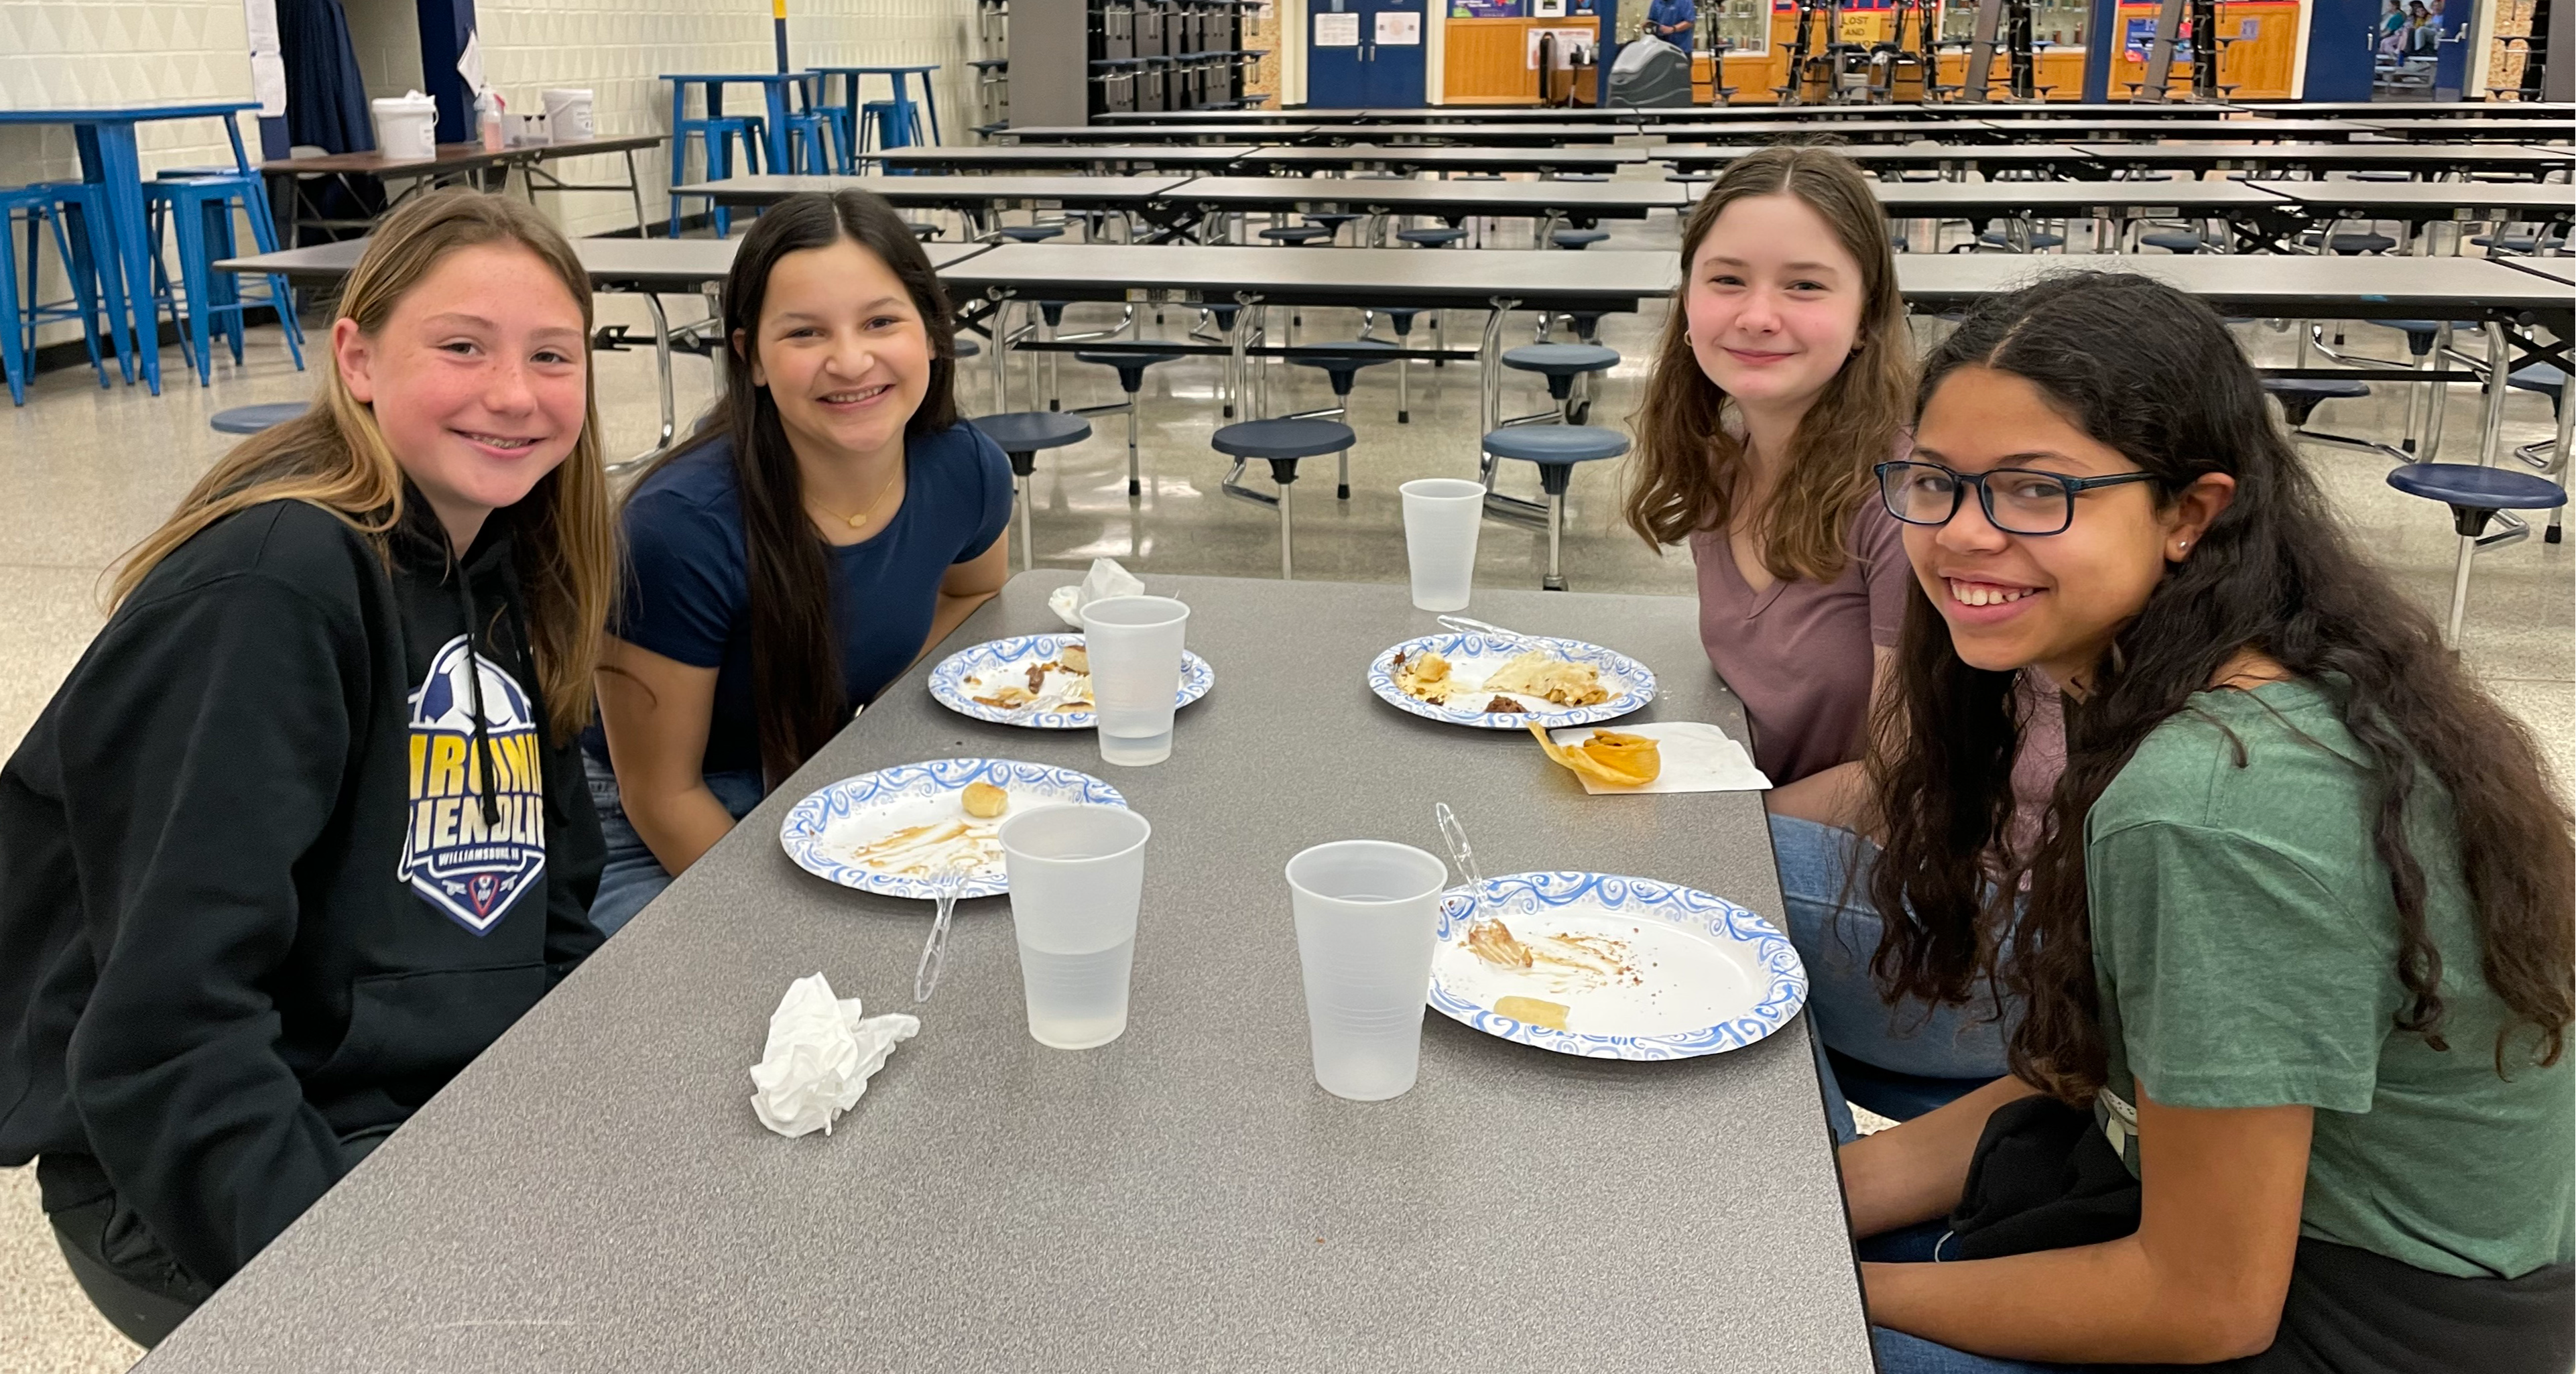 Four girls eating in the school cafeteria